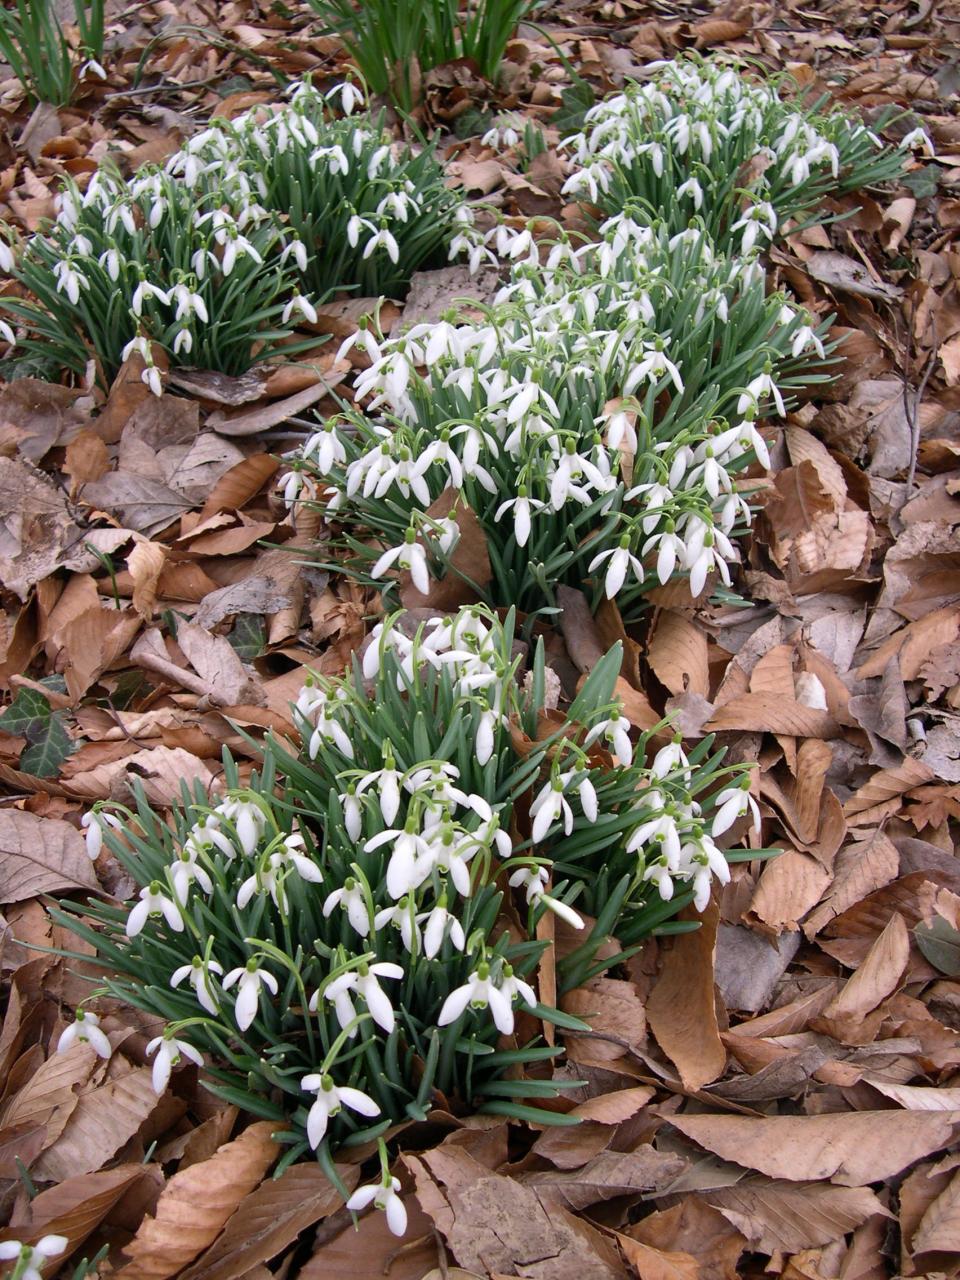 Snow Drops (Galanthus nivalis) start off the spring bulb season with cheerful white blooms in early March and they are rarely bothered by browsing animals.